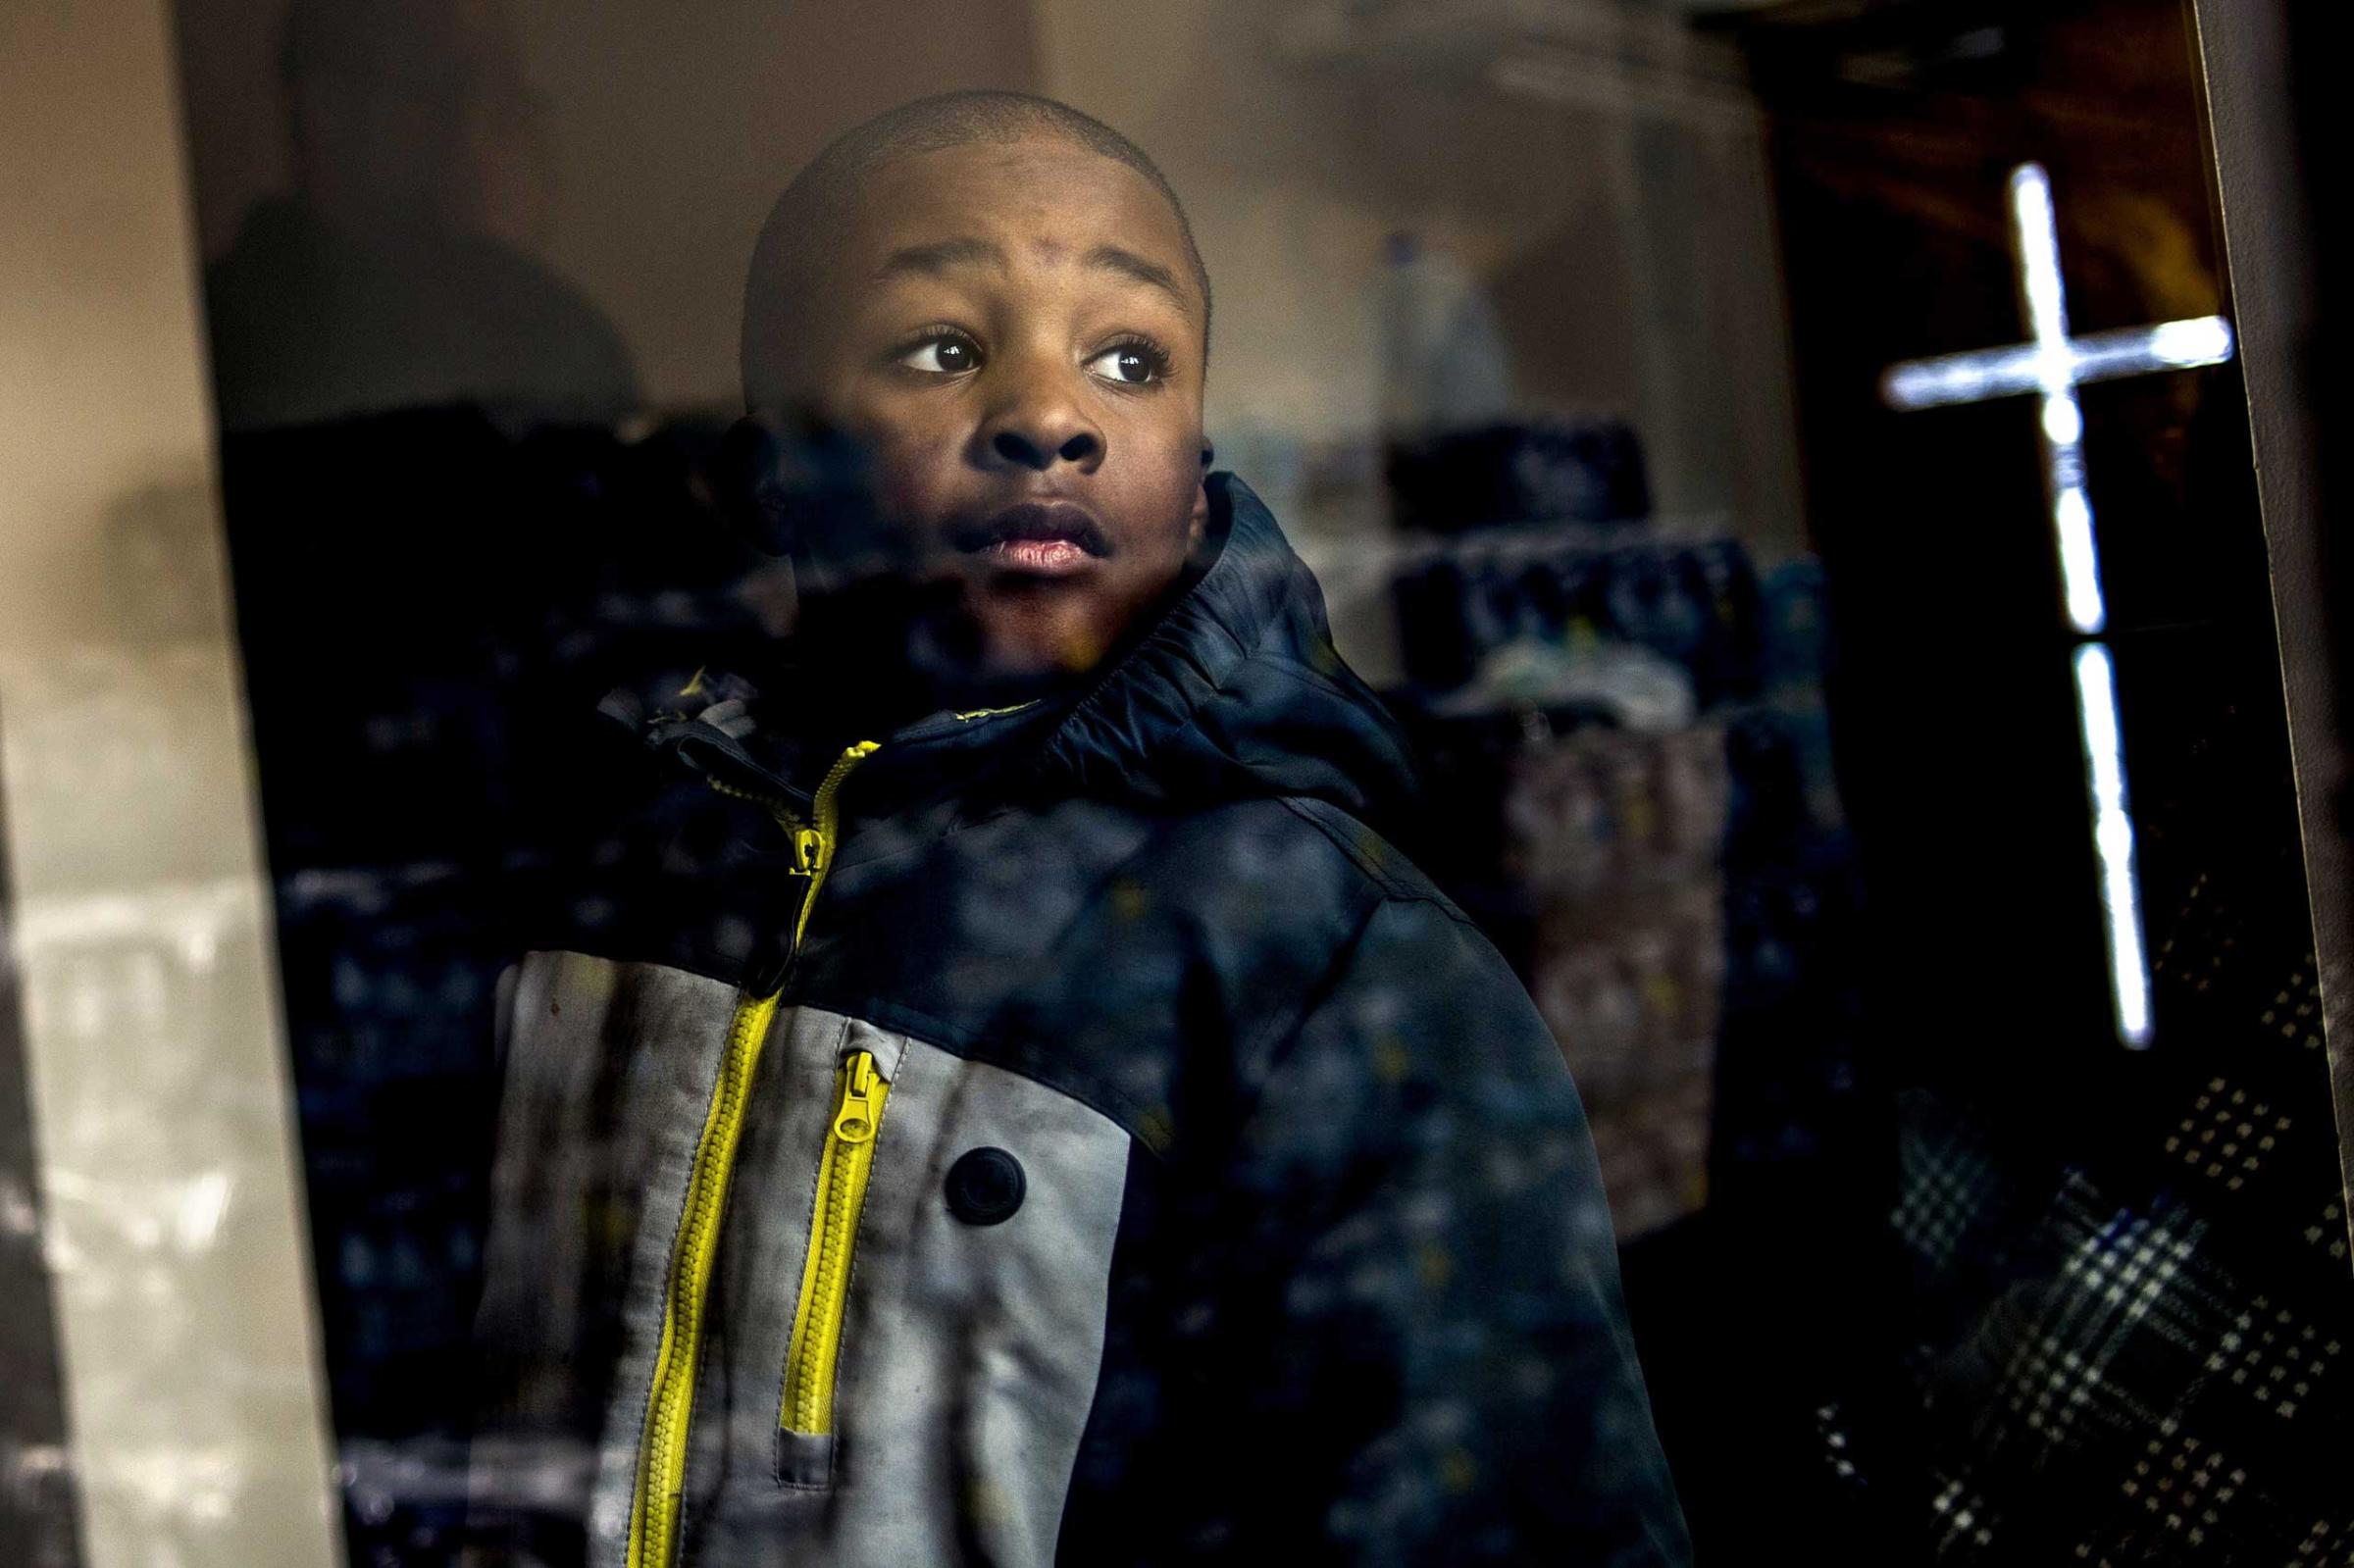 Detroit resident Jaiden Ellis, 8, looks at stacks of free bottled water to be given to the congregation while the Rev. Jesse Jackson, a civil rights leader, discusses the ongoing Flint water crisis on Jan. 17, 2016, in Flint, Mich. The water became contaminated after Flint switched from the Detroit water system to the Flint River as a cost-cutting move.